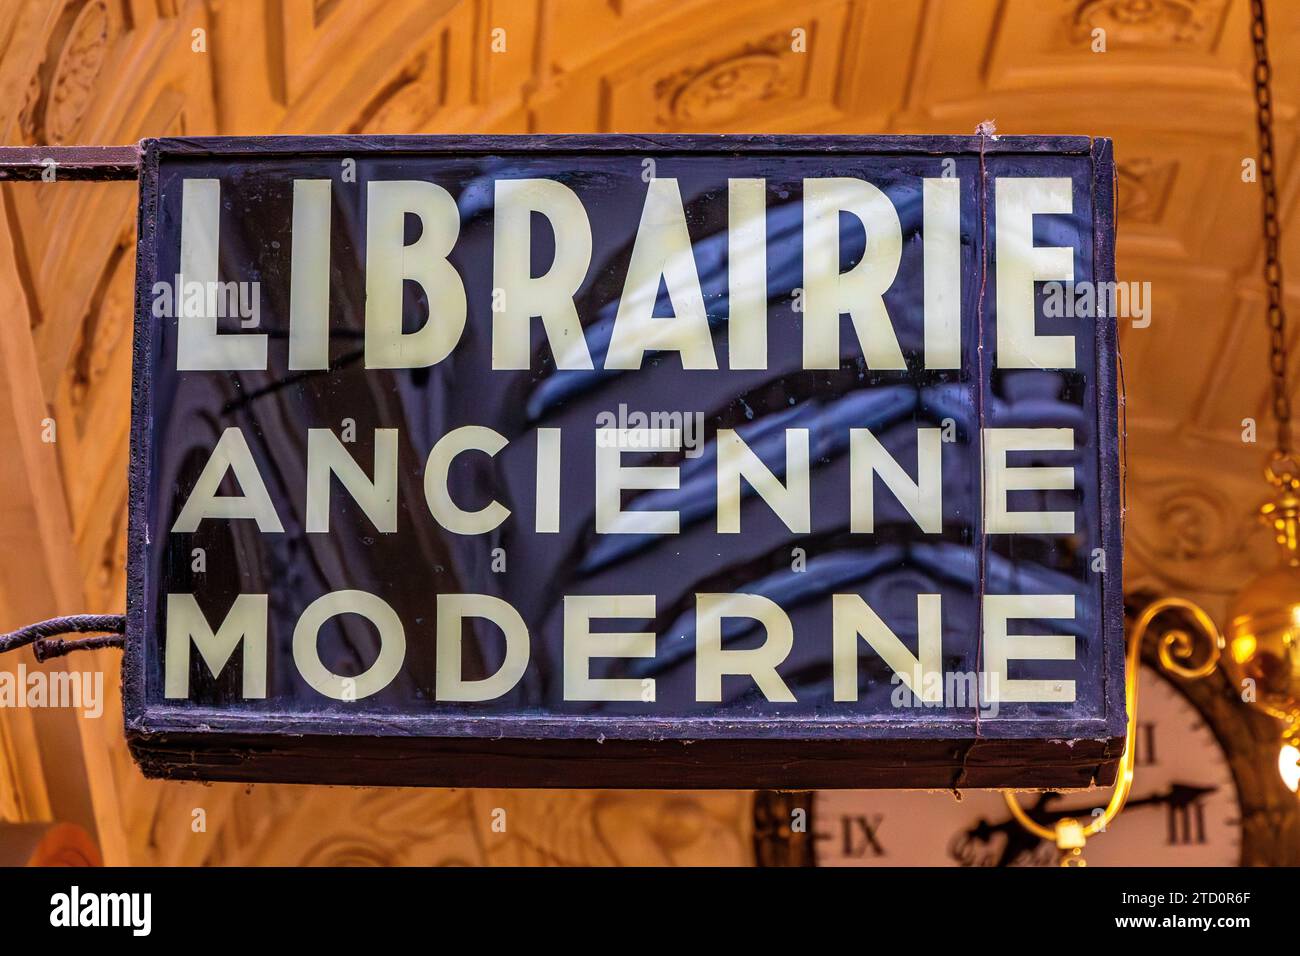 Librairie ancienne et moderne sign inside Galerie Vivienne, a beautiful covered shopping arcade located in the 2nd arrondissement of Paris, France Stock Photo